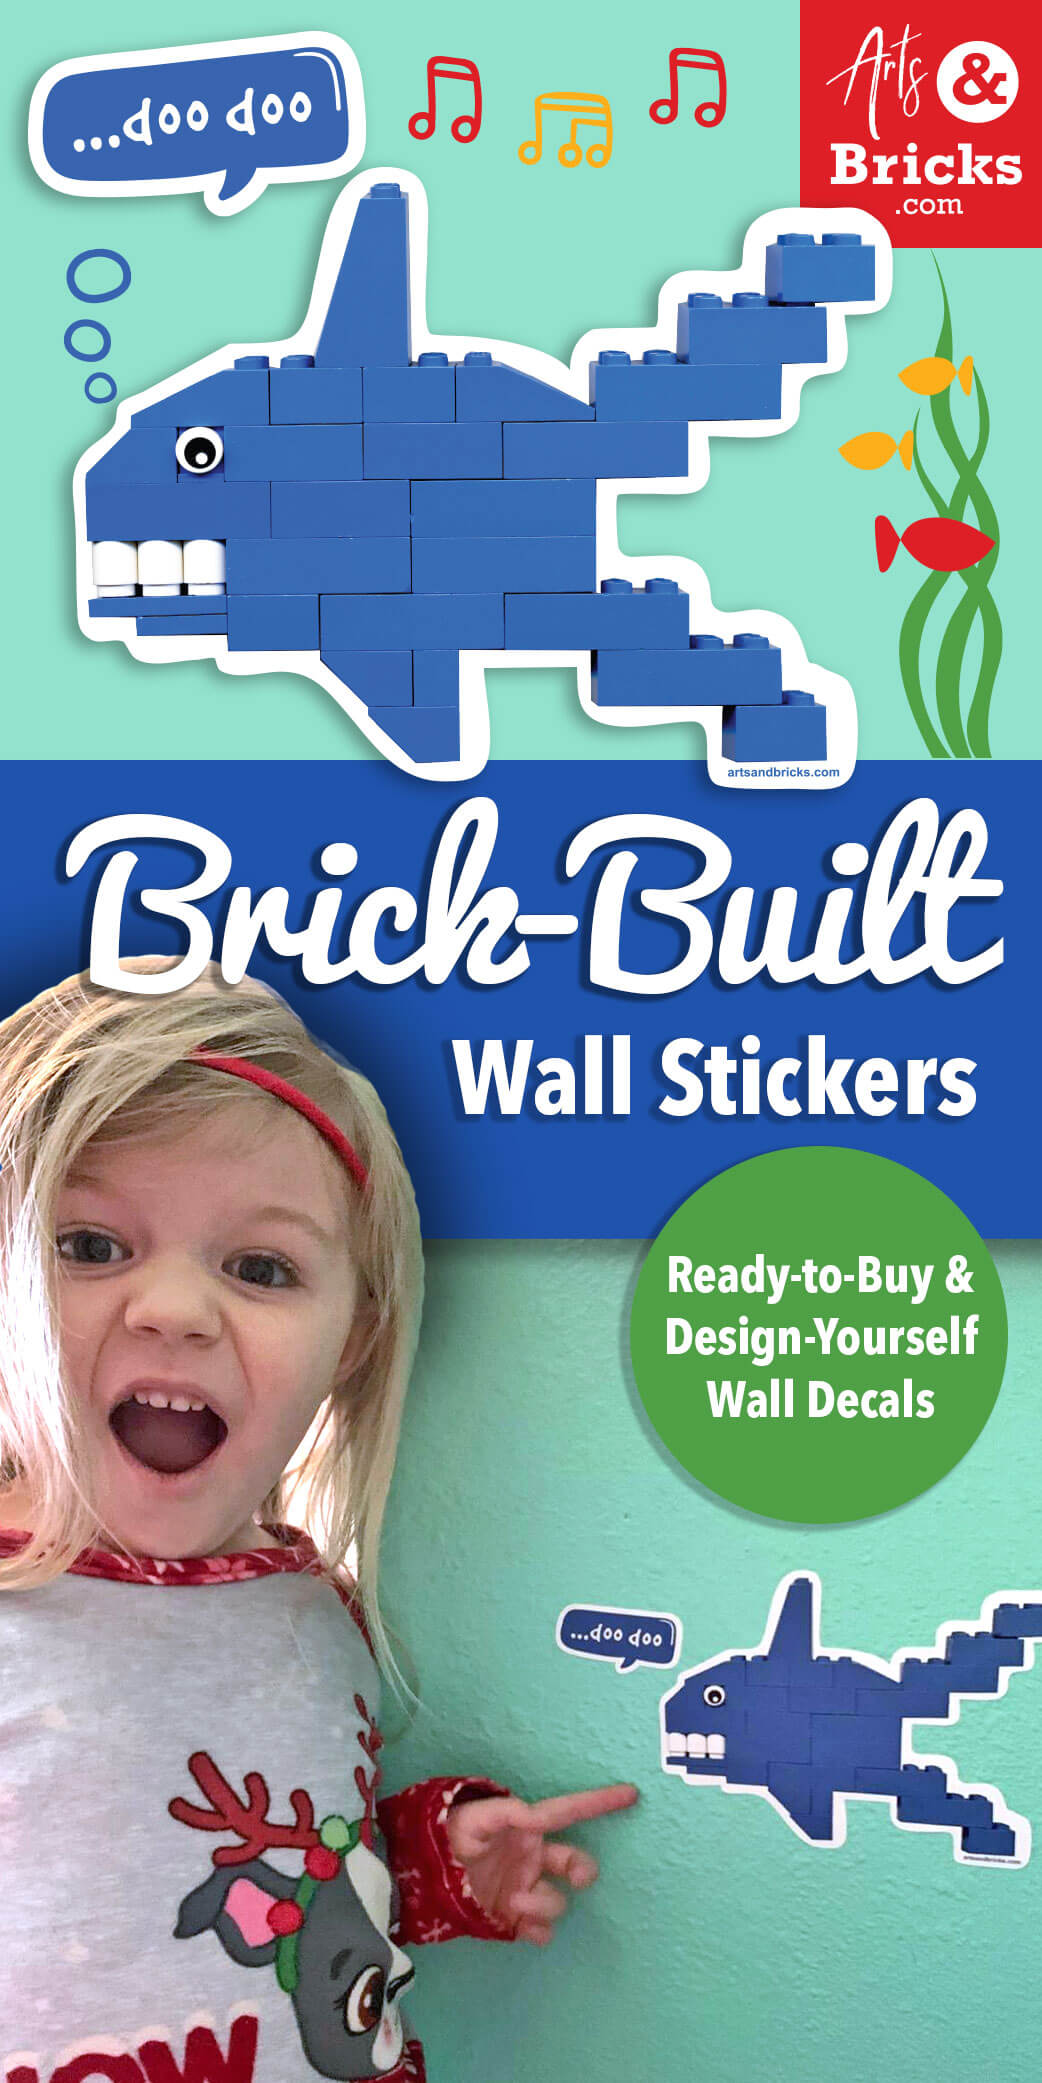 Sharks! What kid doesn't love them? But, how do you build a shark out of bricks? Here are a few inspirations and guides.
Purchase Brick-built wall stickers / wall decals, even a a blue brick-built shark wall decal for kids room decor.